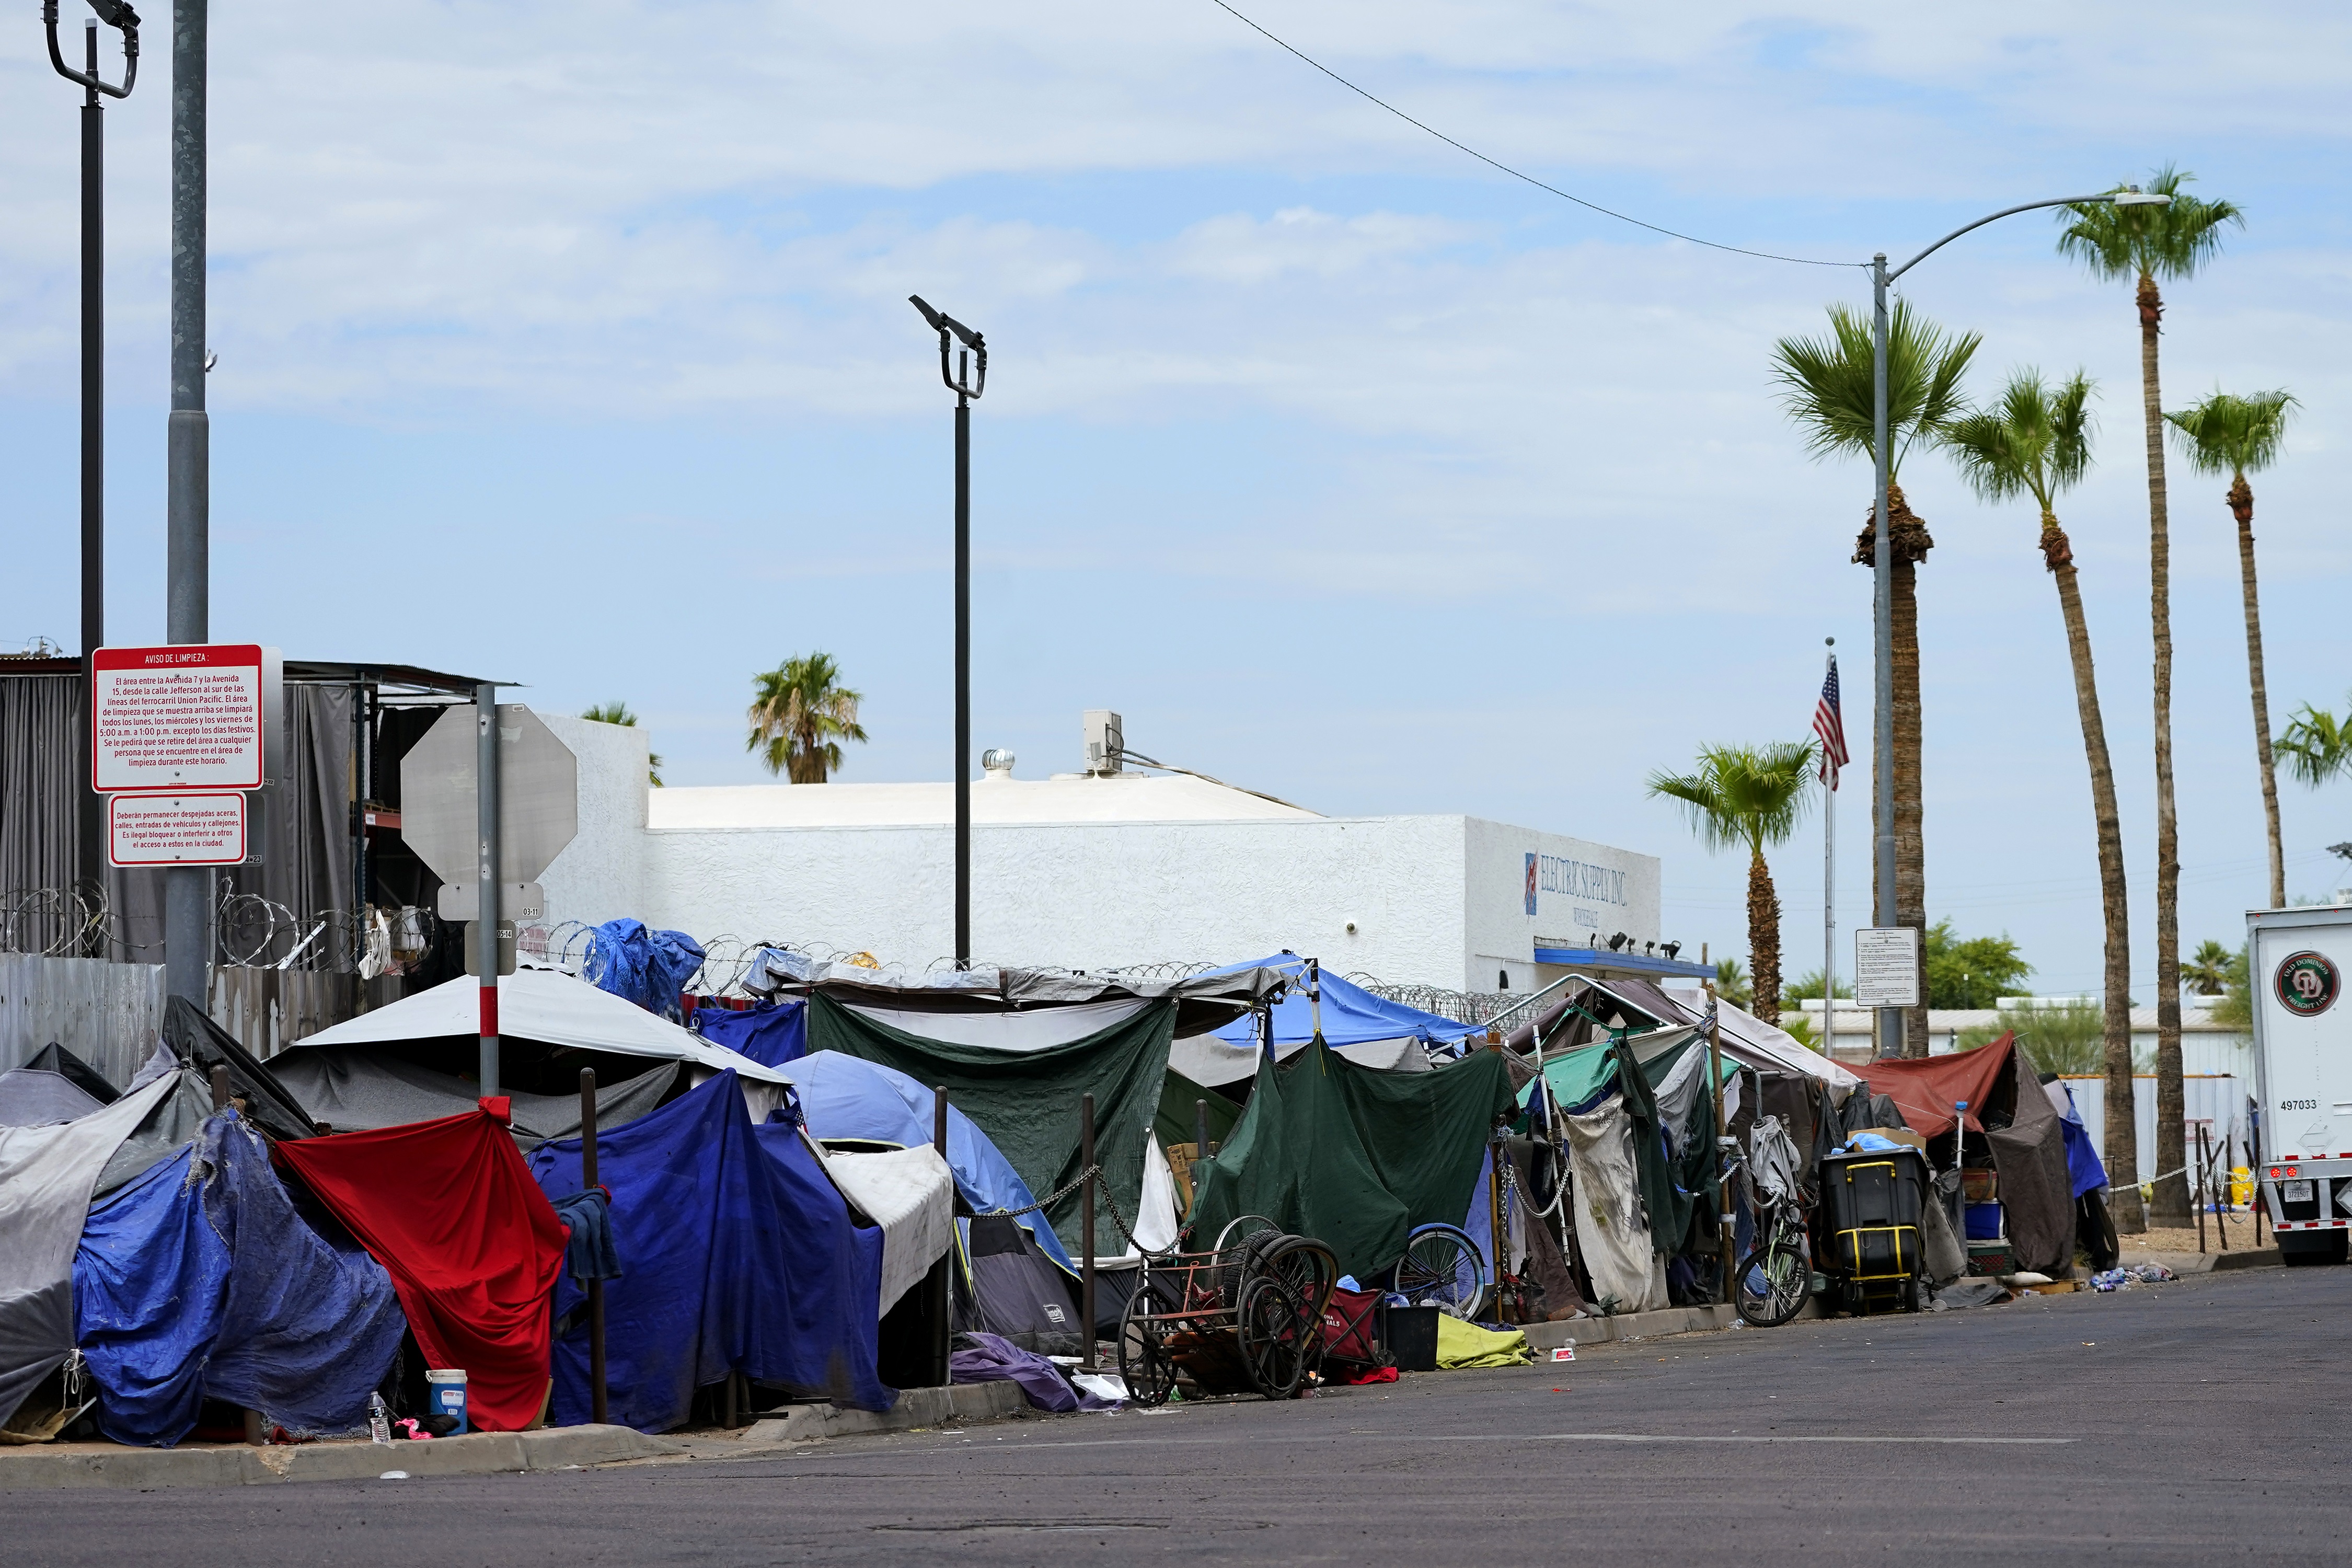 Phoenix successfully clears downtown homeless encampment, relocating over 500 to shelters.